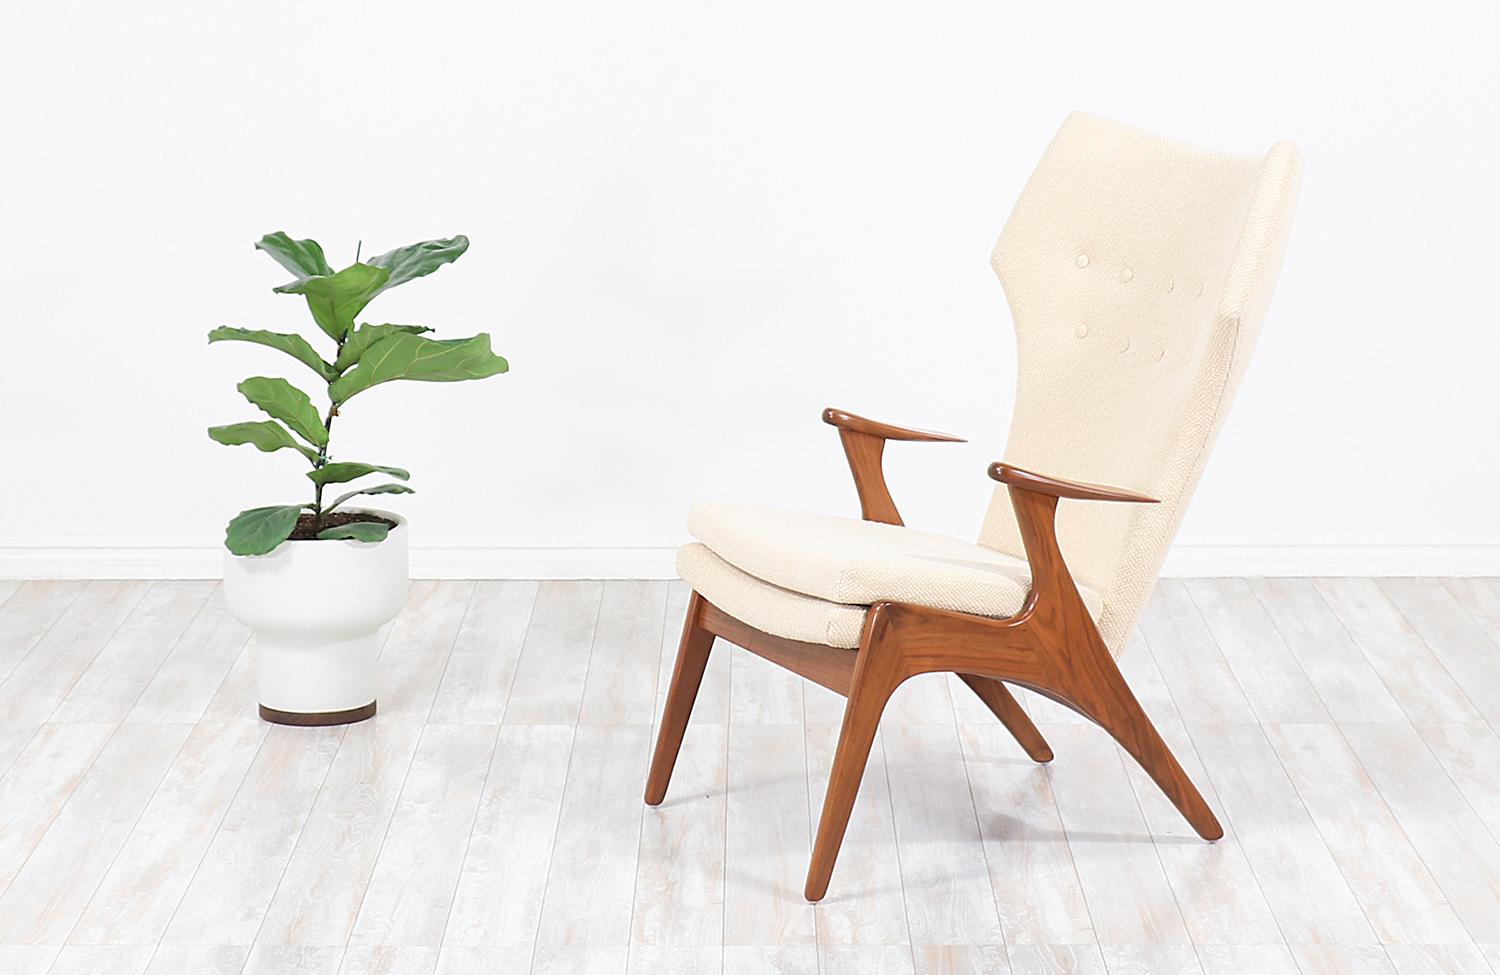 Stylish modern high wing-back chair designed by Kurt Østervig for Rolschau Møbler in Denmark circa 1950s. This gorgeous chair design features a solid walnut wood frame with curved leaf-shaped armrests balancing the design's symmetry while featuring